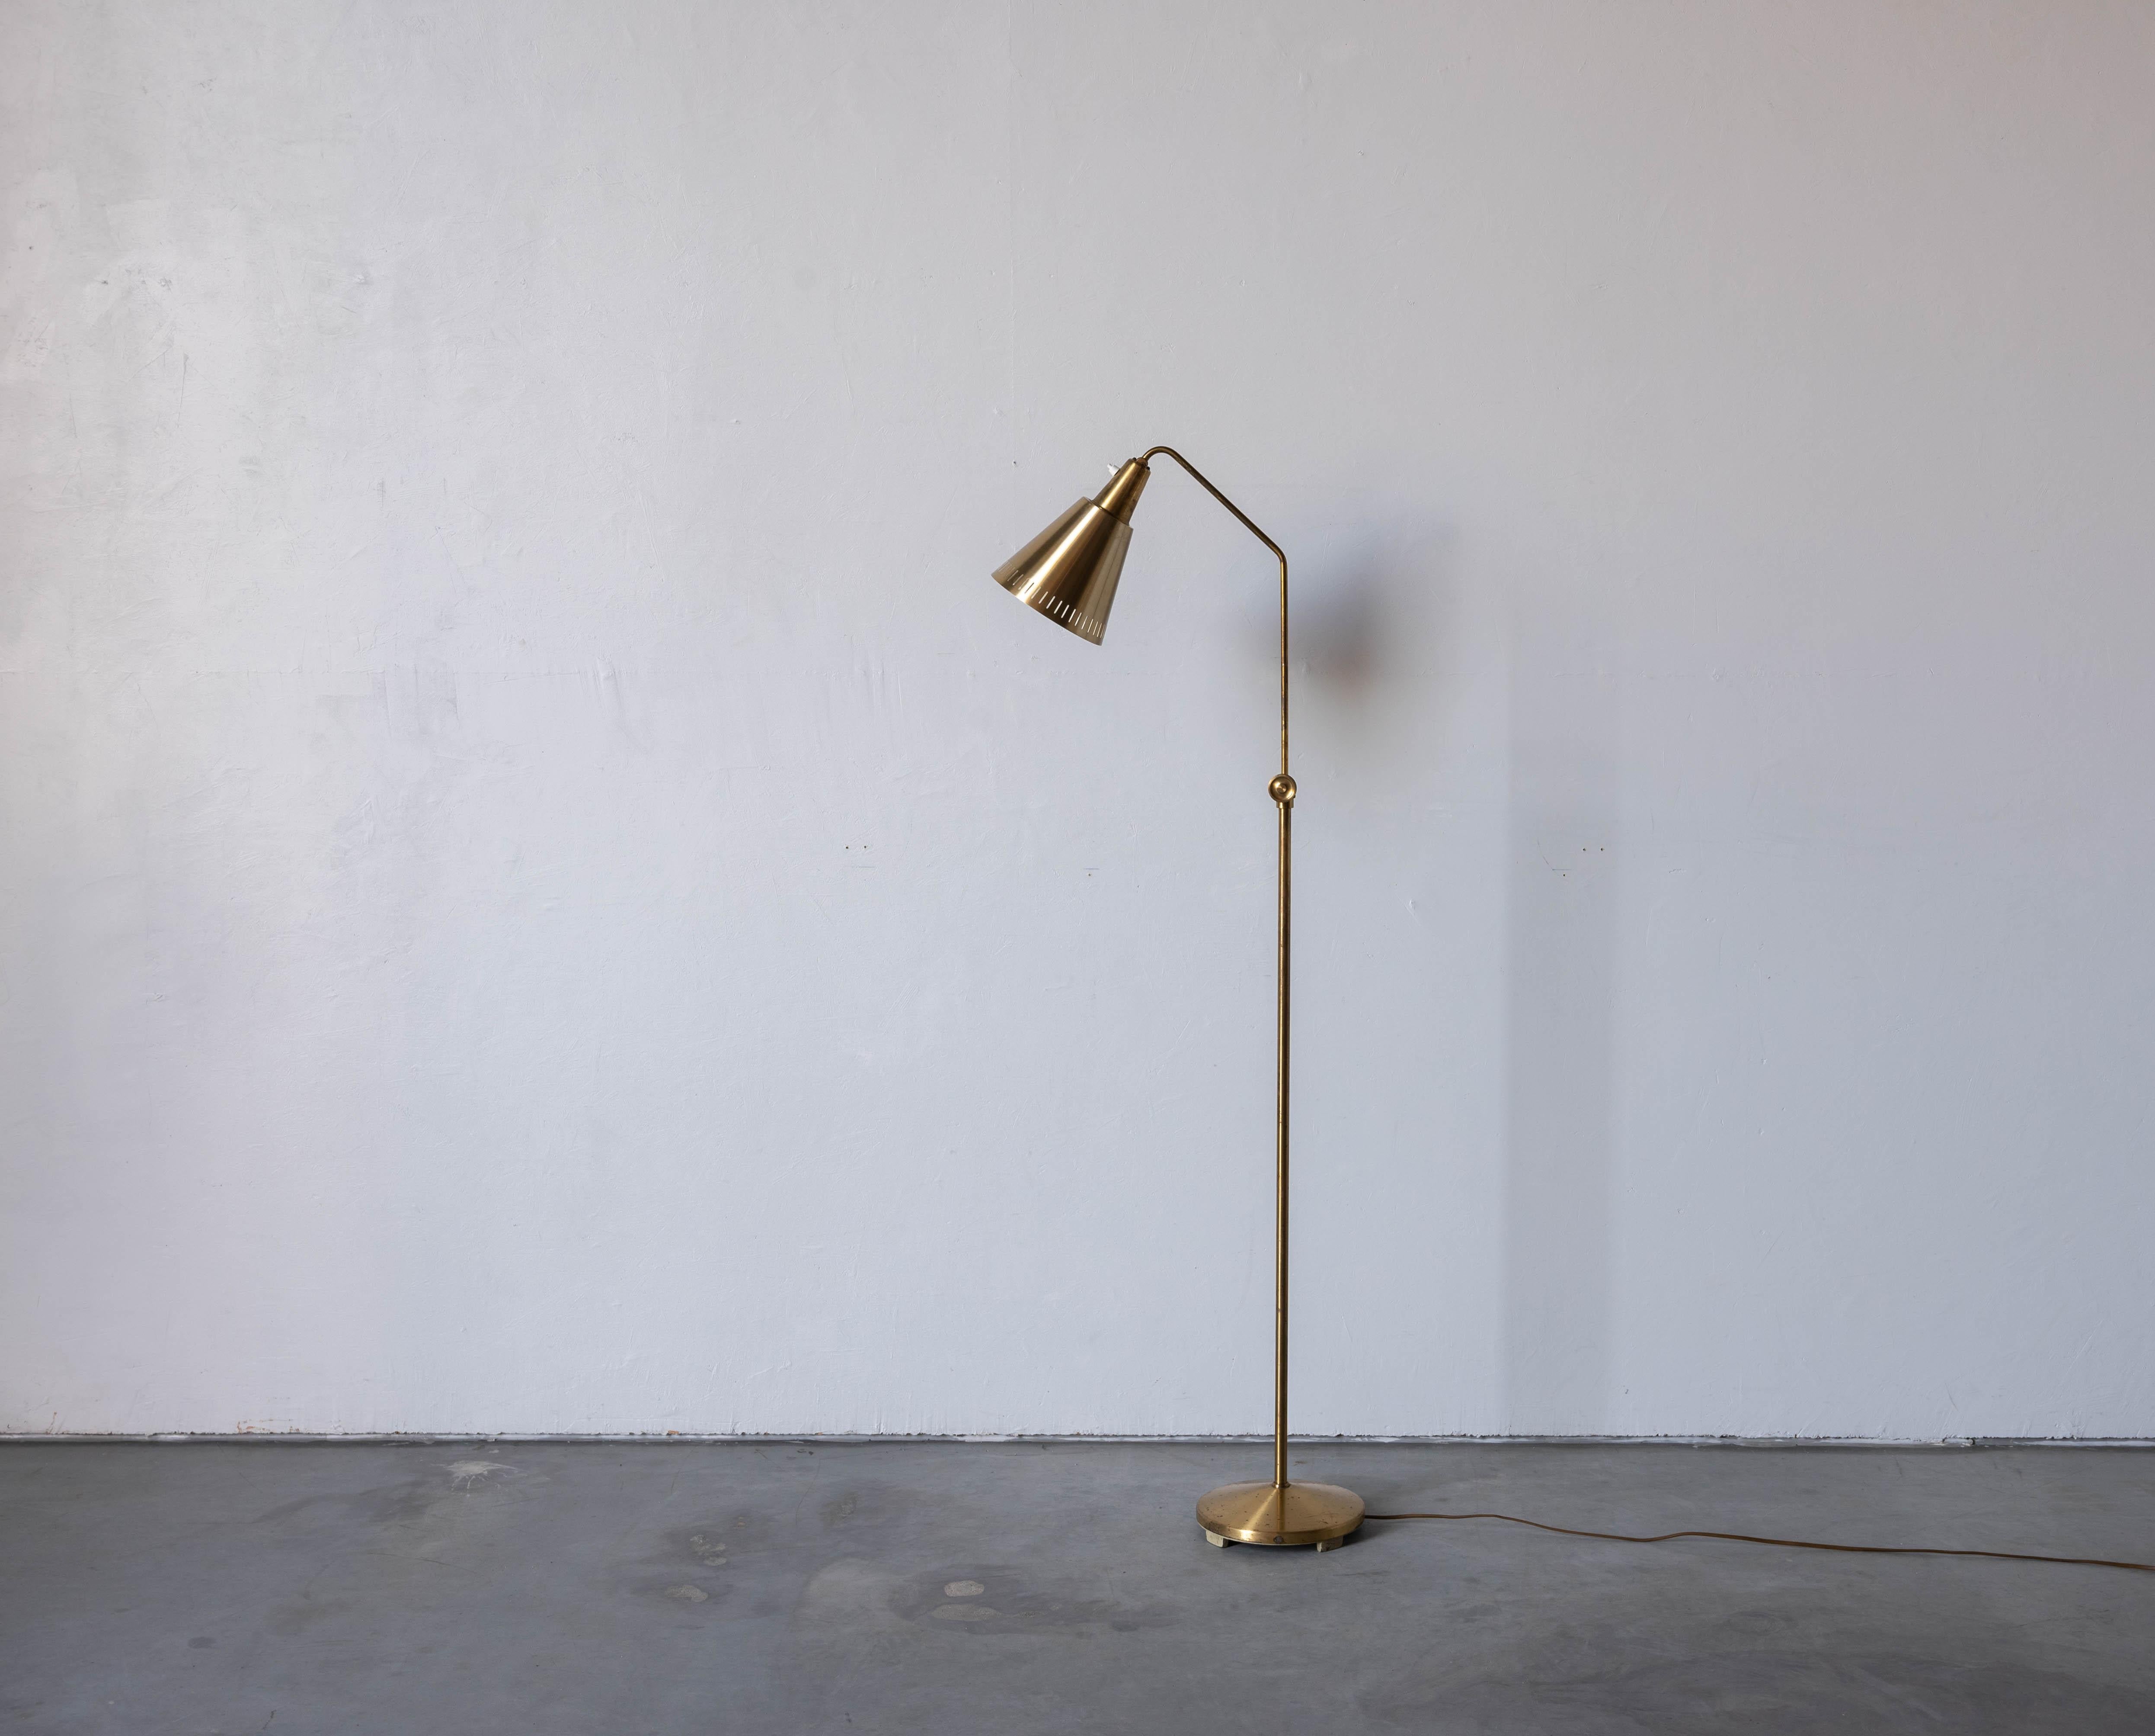 A floor lamp, designed attributed to Swedish Hans Bergström Produced by ASEA, Sweden, 1950s.

